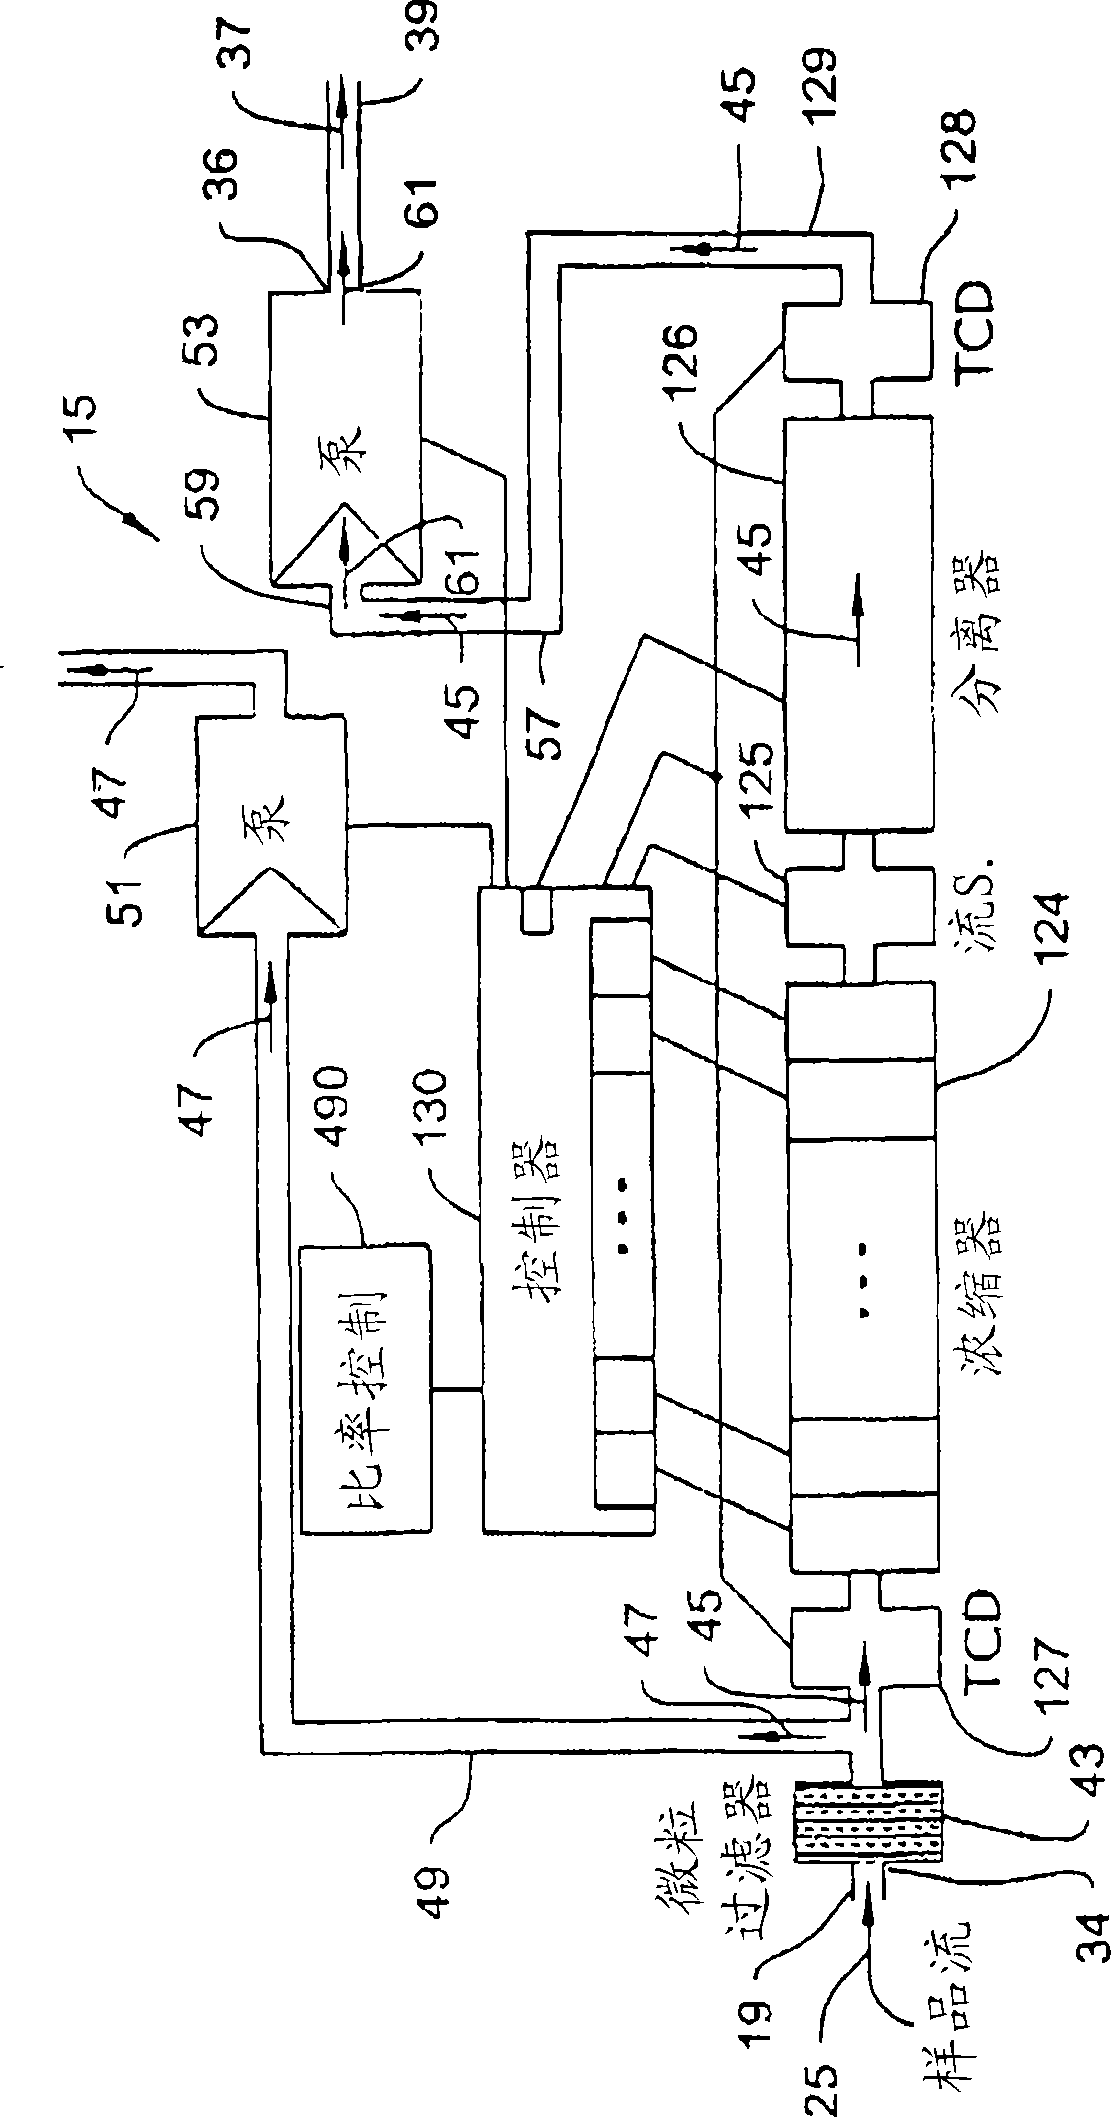 Phased VII micro fluid analyzer having a modular structure